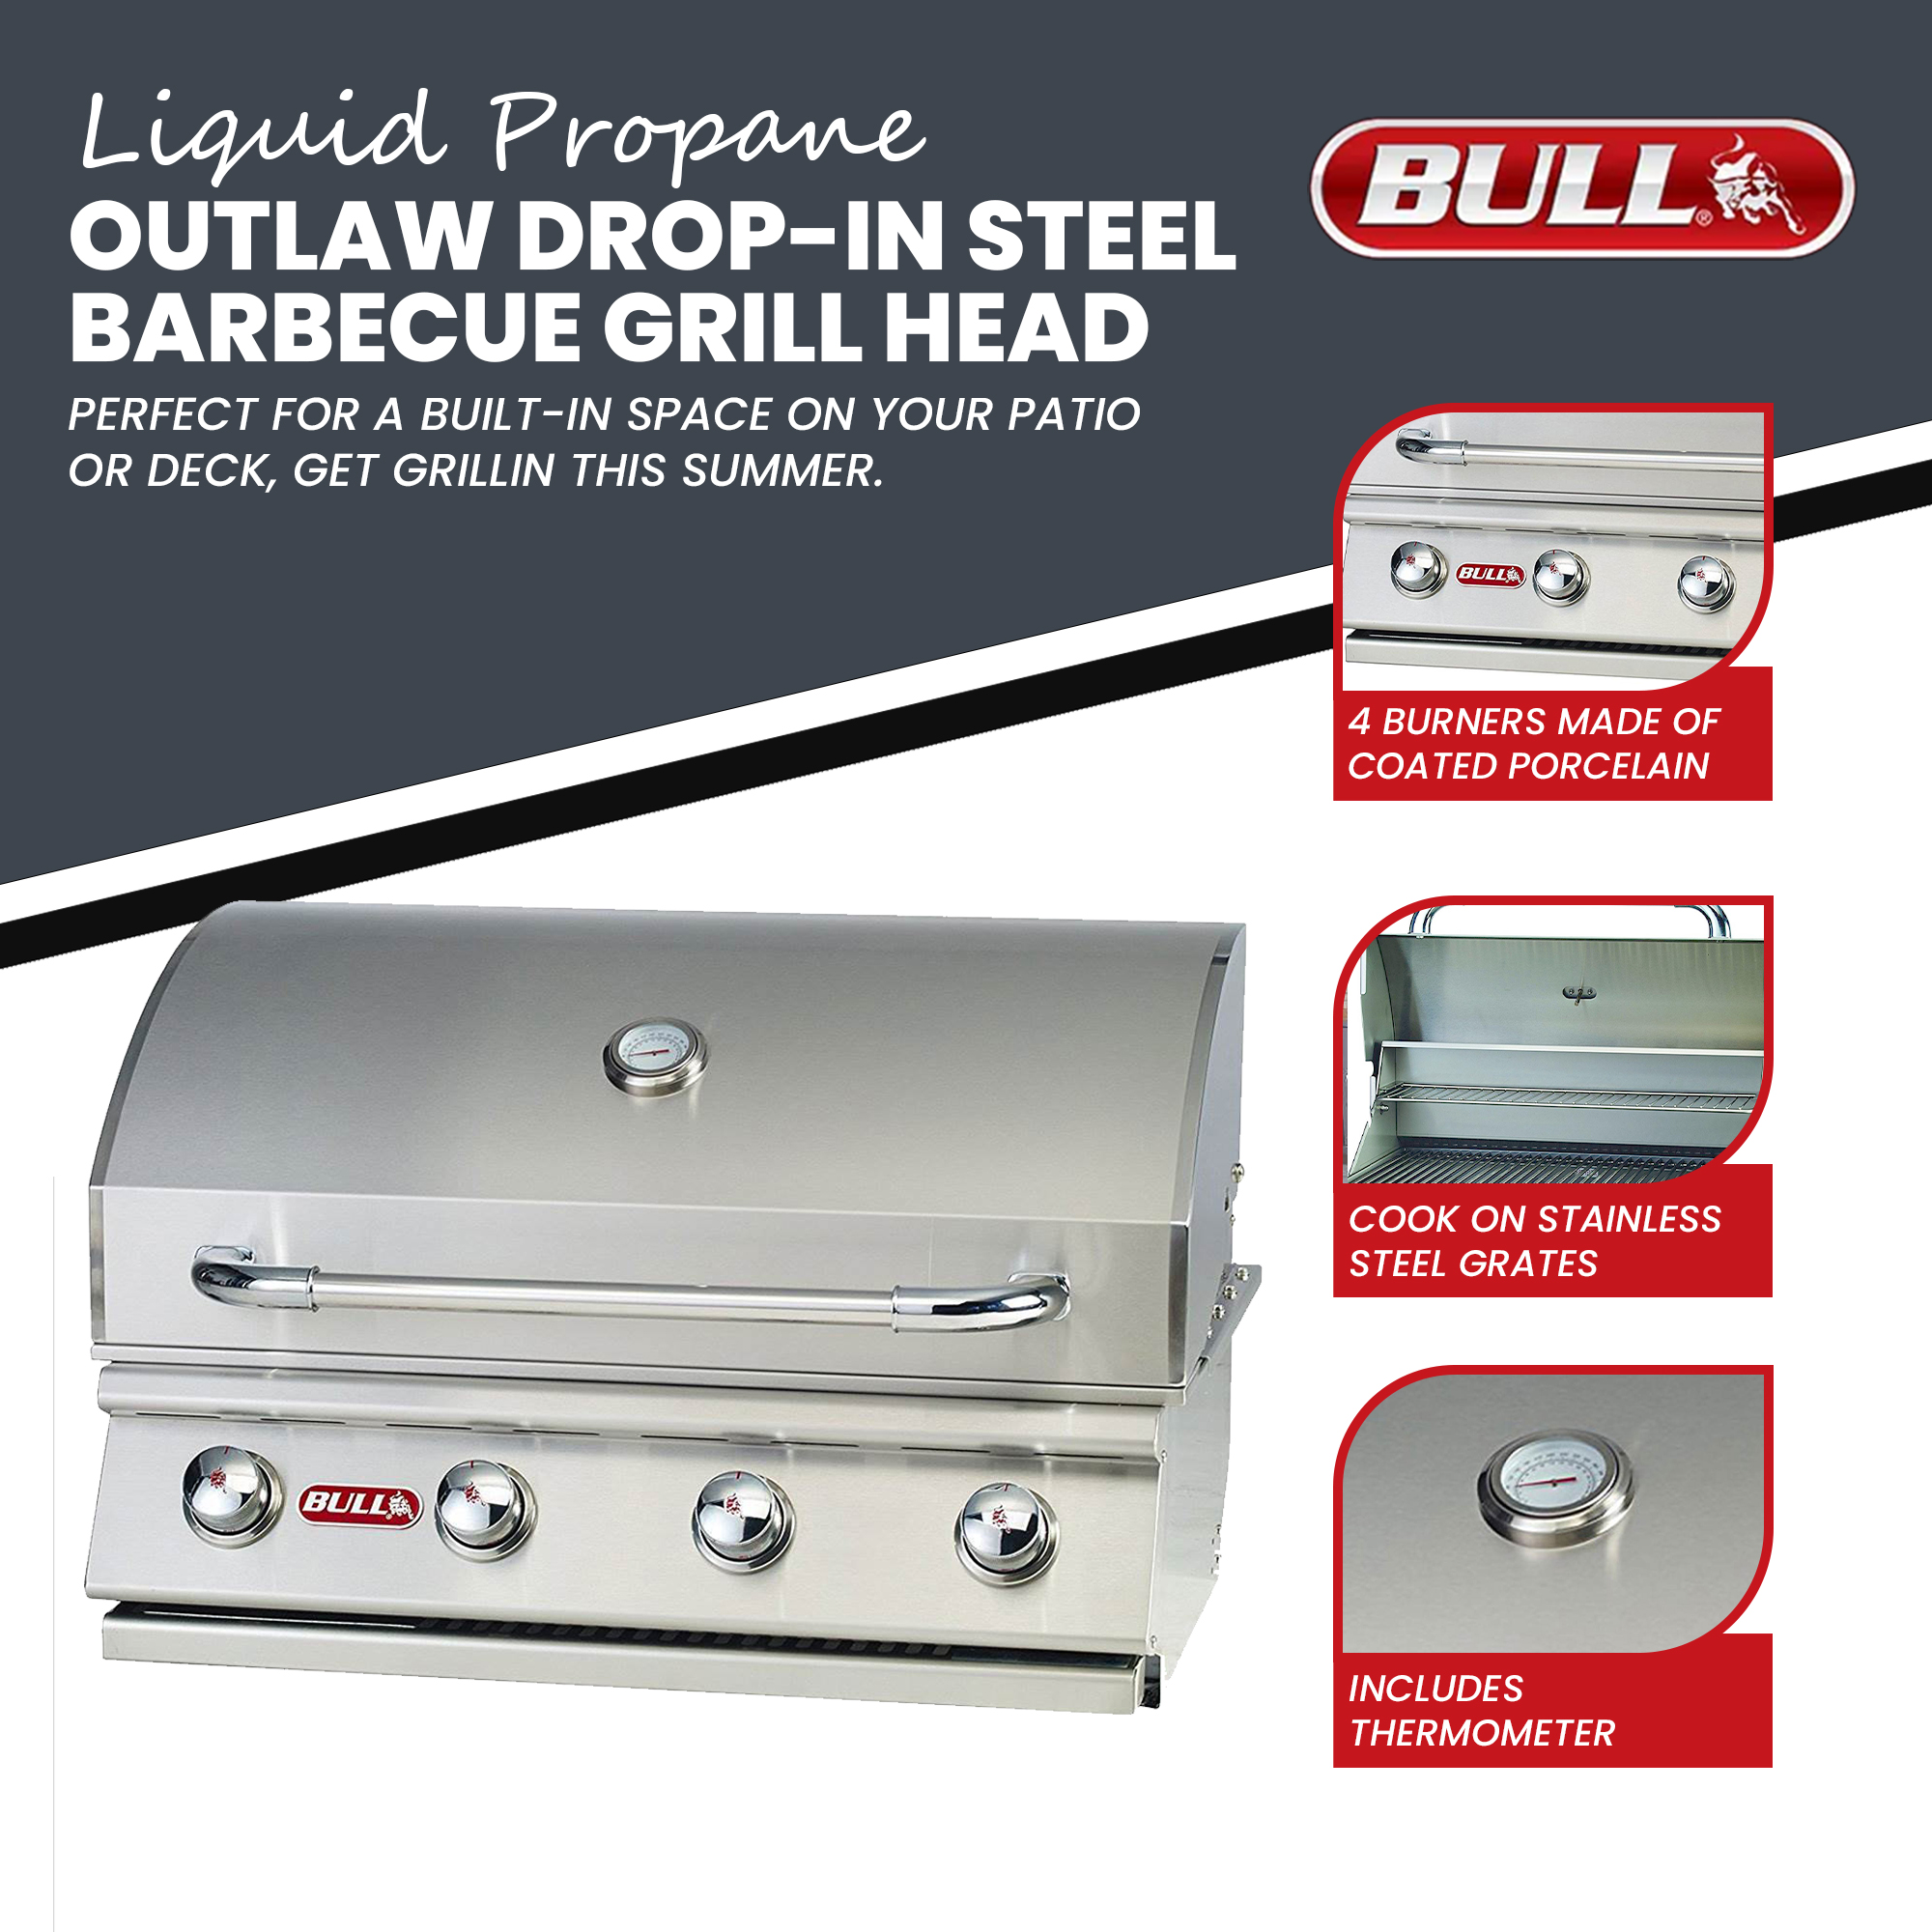 Bull Outdoor Products Liquid Propane Outlaw Drop-In Barbecue Grill Head - image 2 of 10